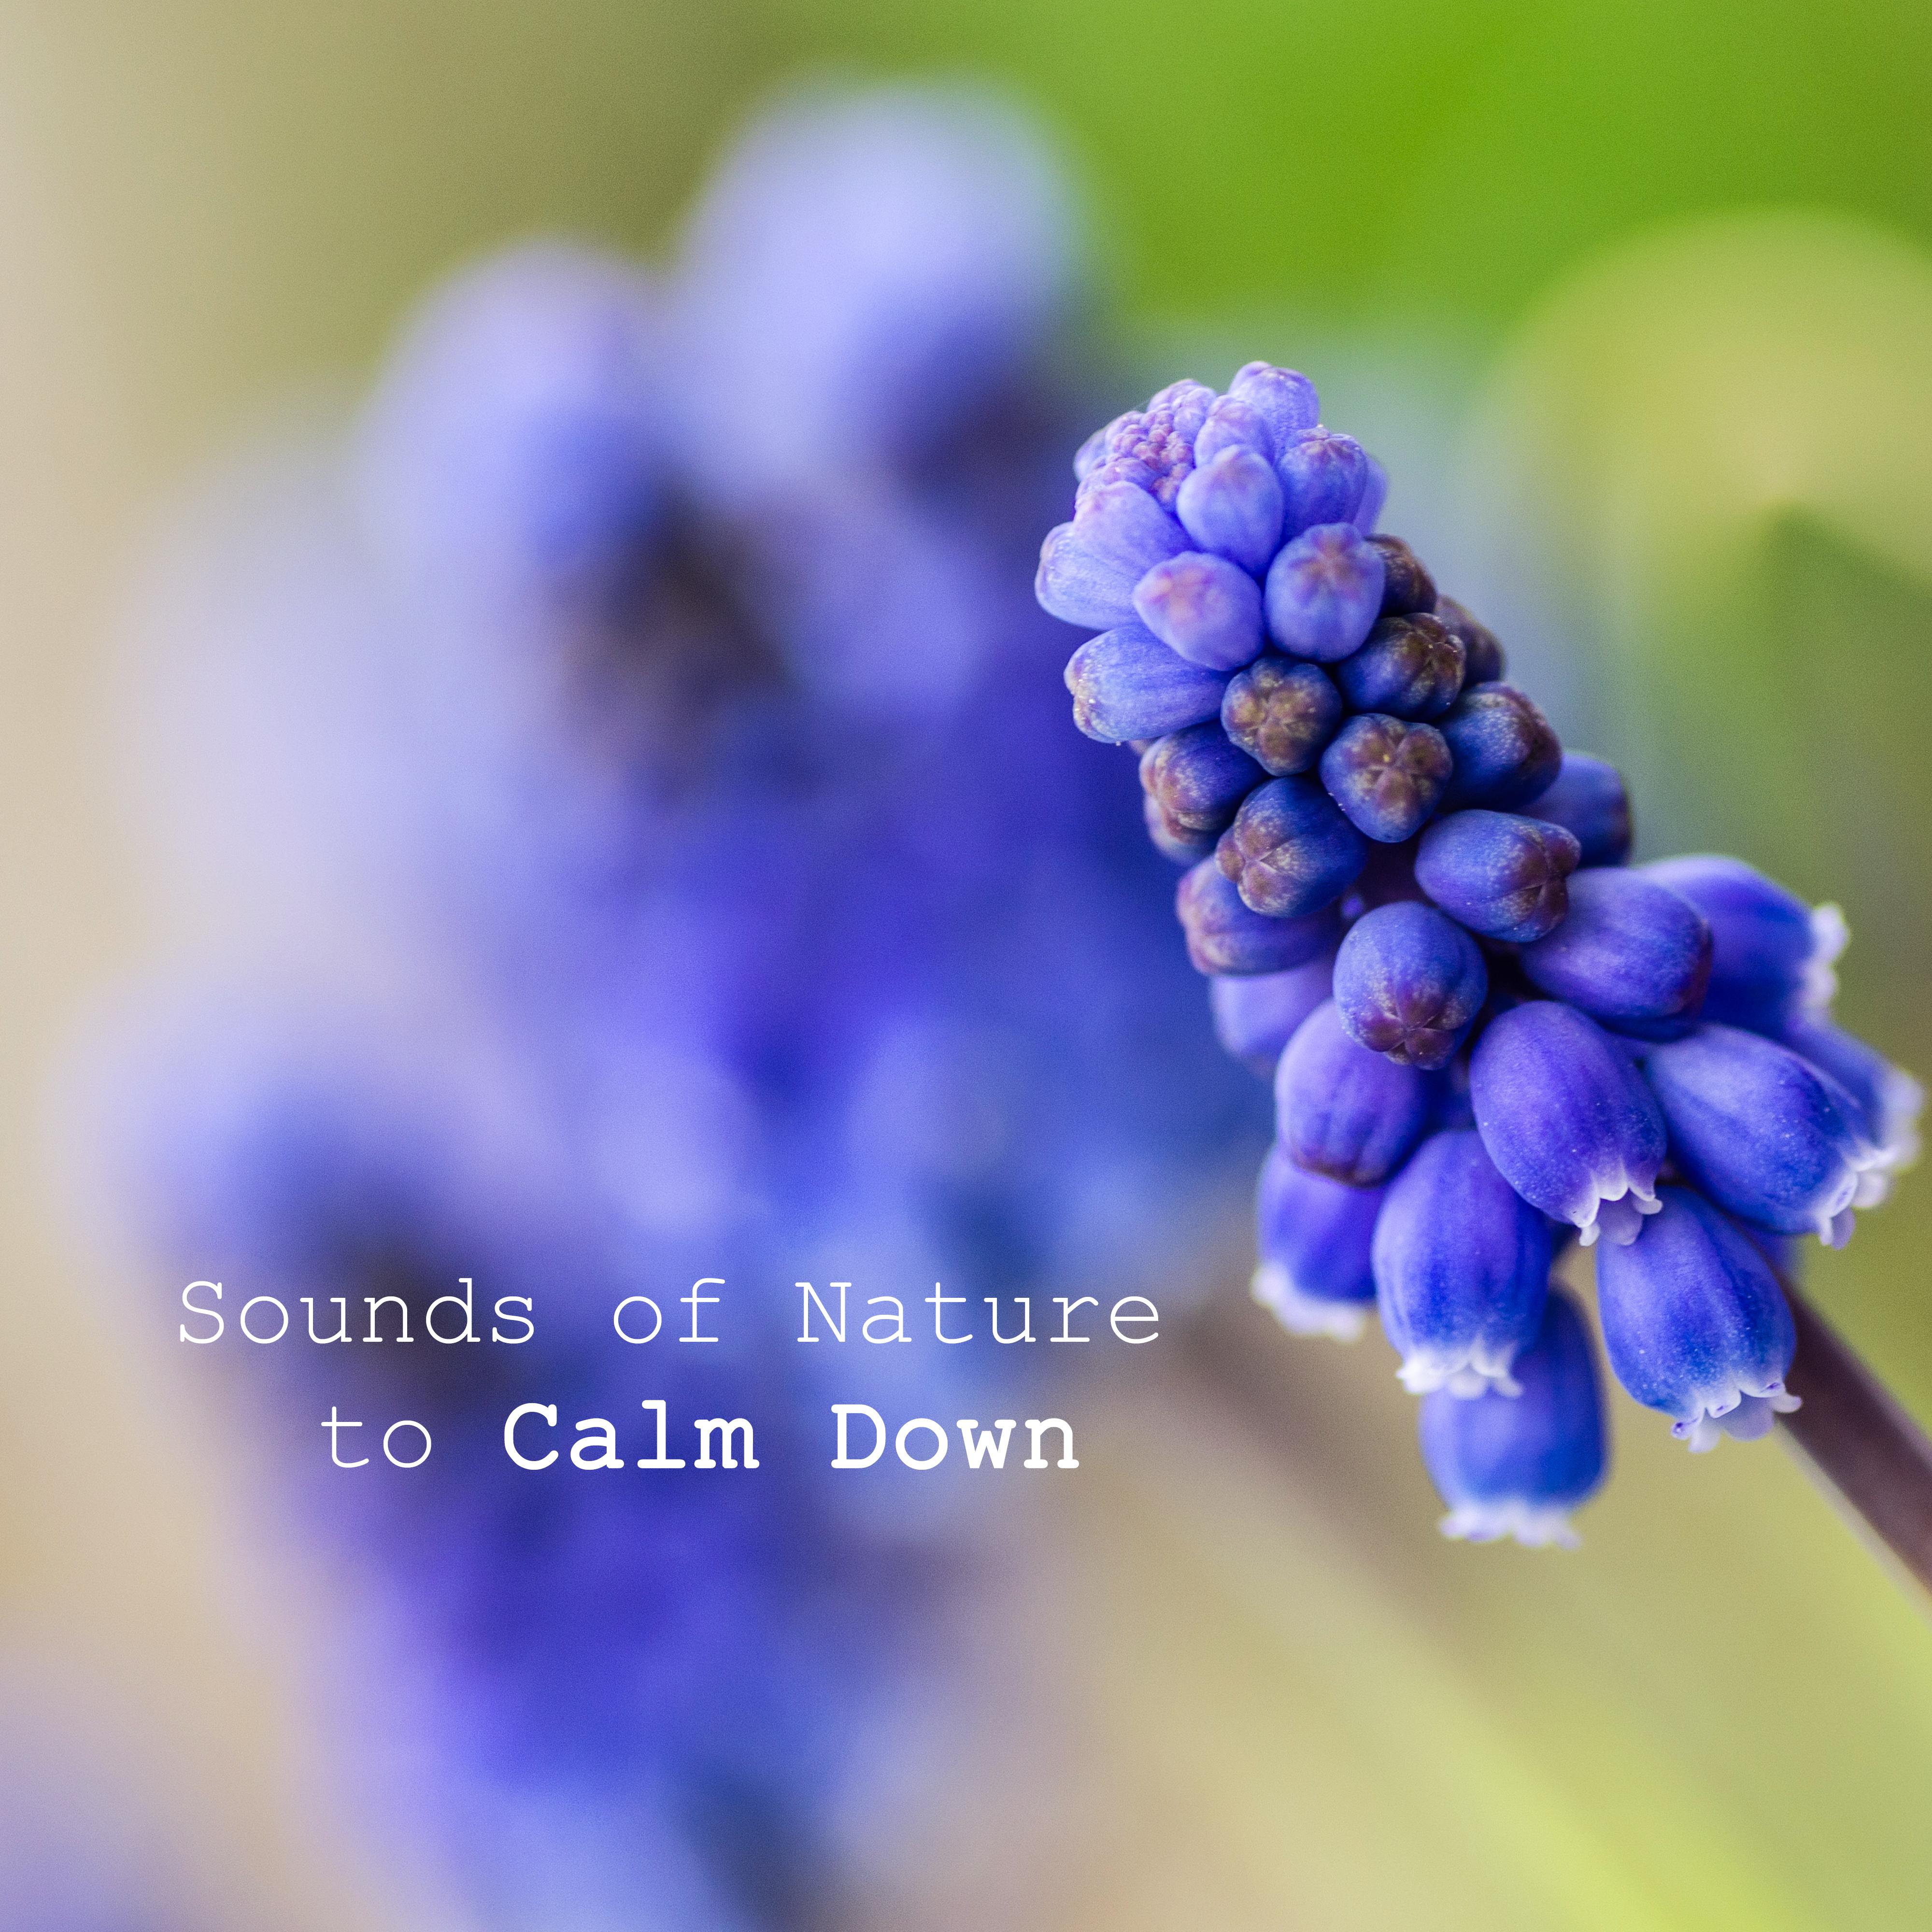 Sounds of Nature to Calm Down  Peaceful Music, Healing Songs, Anti Stress Music, Pure Relaxation, Soothing Piano, Sounds of Birds, Relaxing Waves